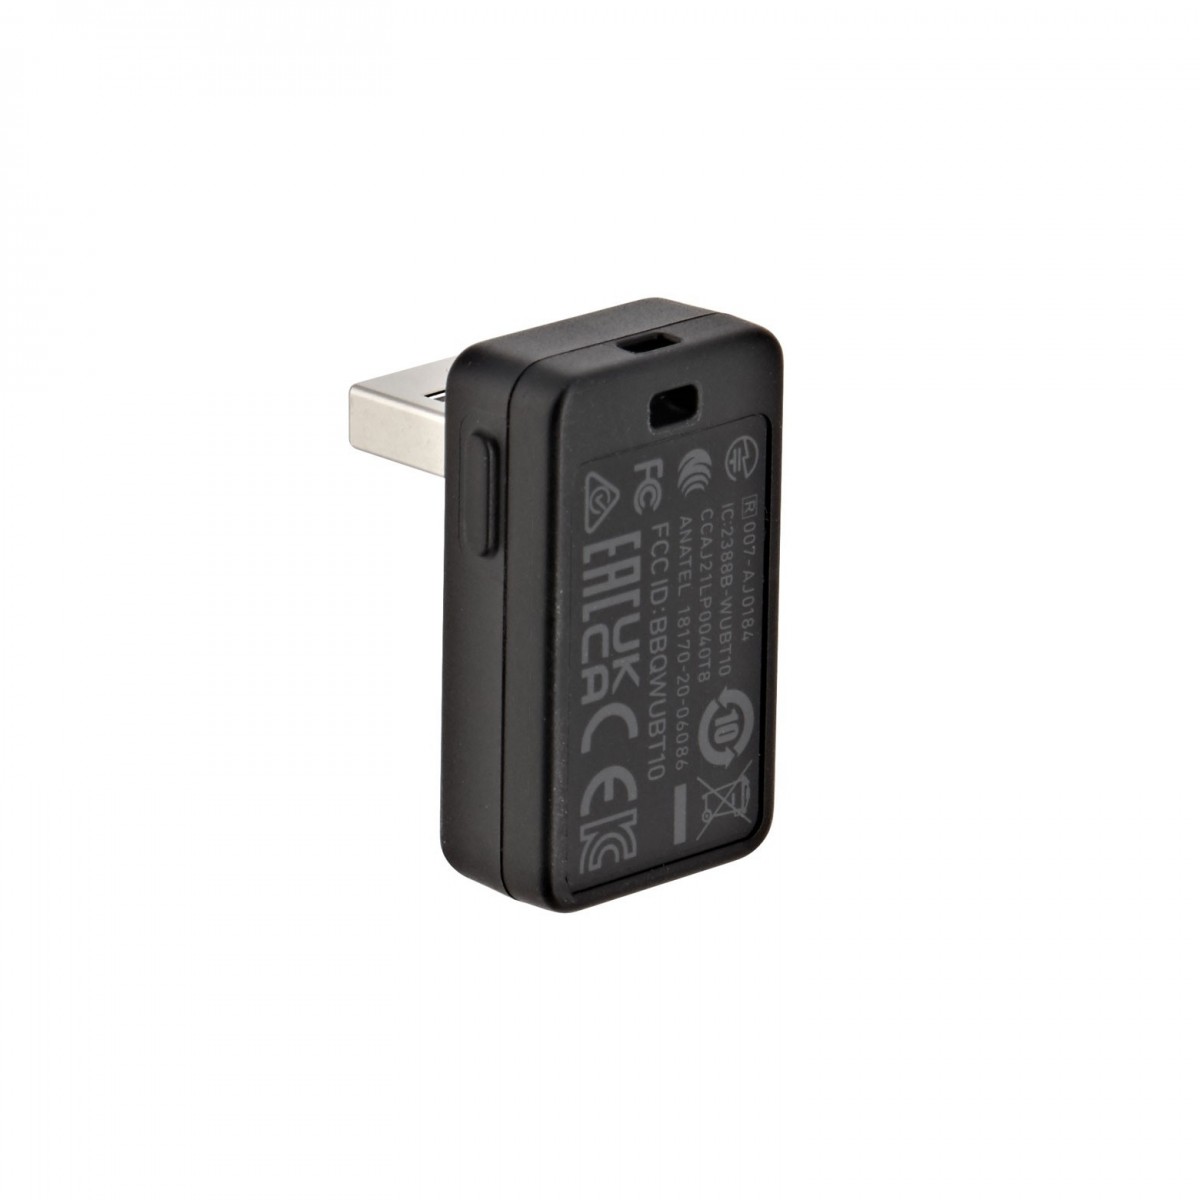 An image of Casio WU-BT10C5 Bluetooth Dongle | PMT Online